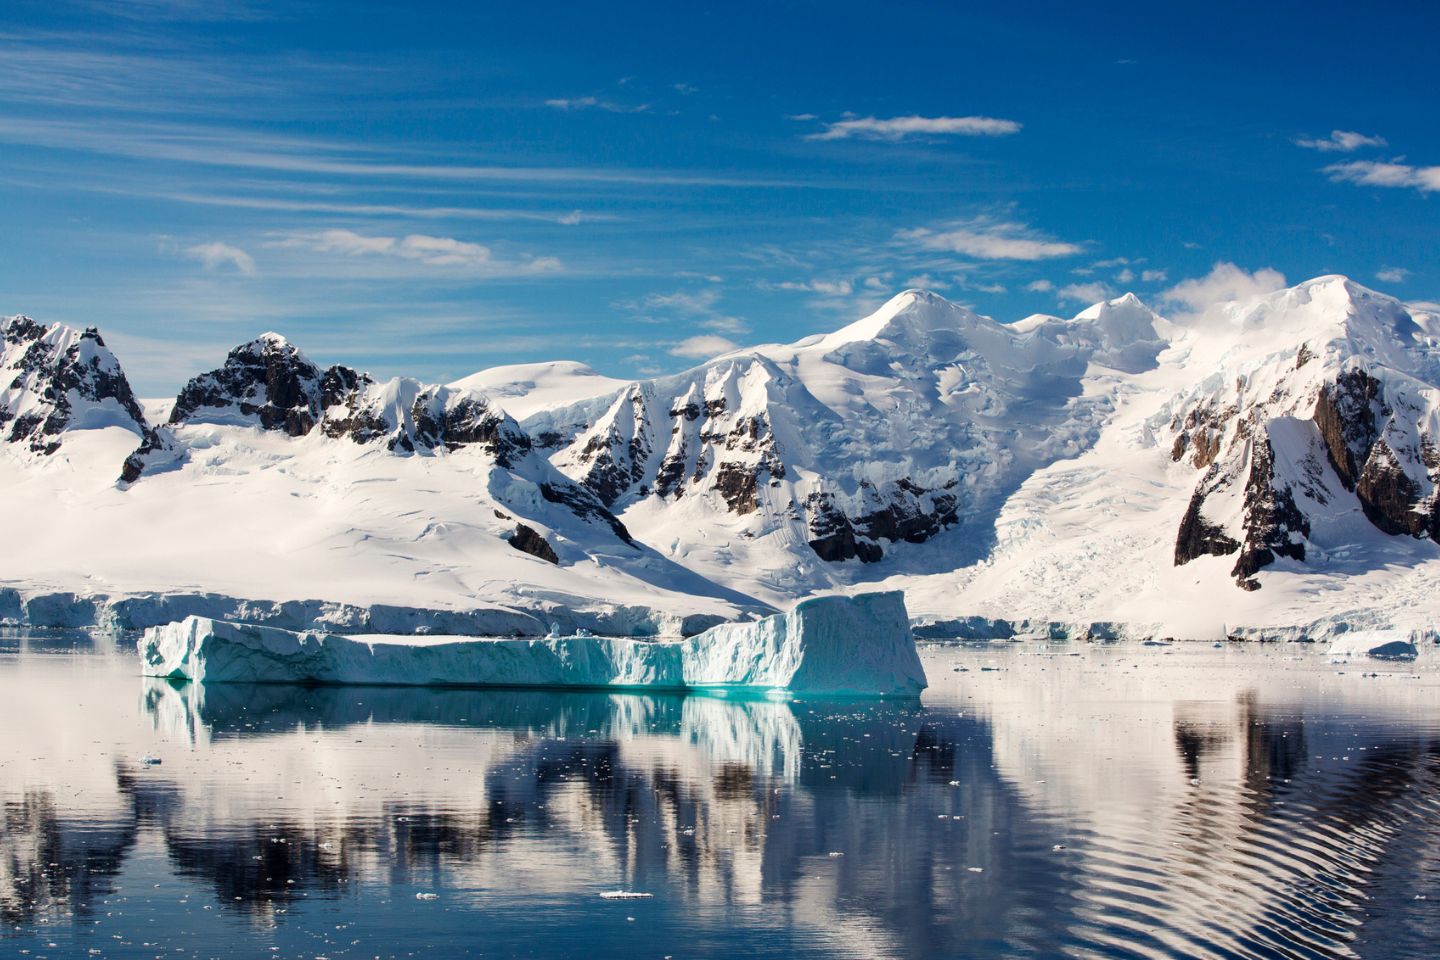 Researches Find Ancient Landscape Hidden Beneath Antarctic Ice For Millions Of Years